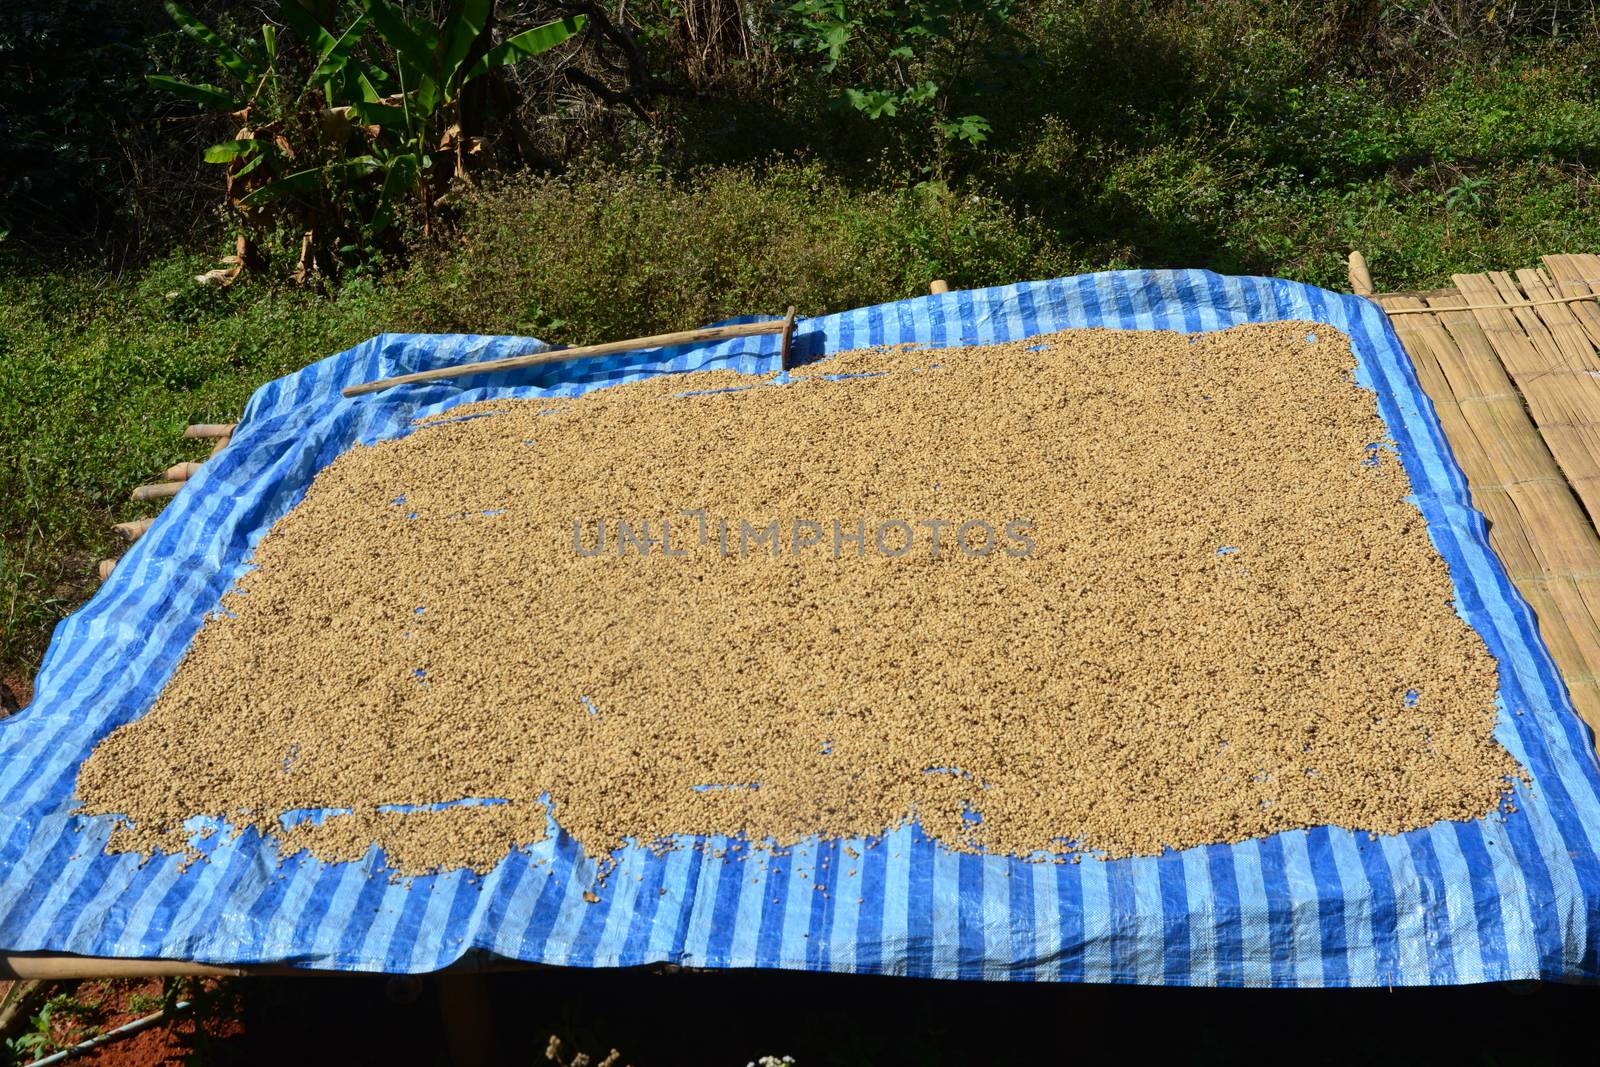 Arabica Coffee beans drying in the sun. by ideation90